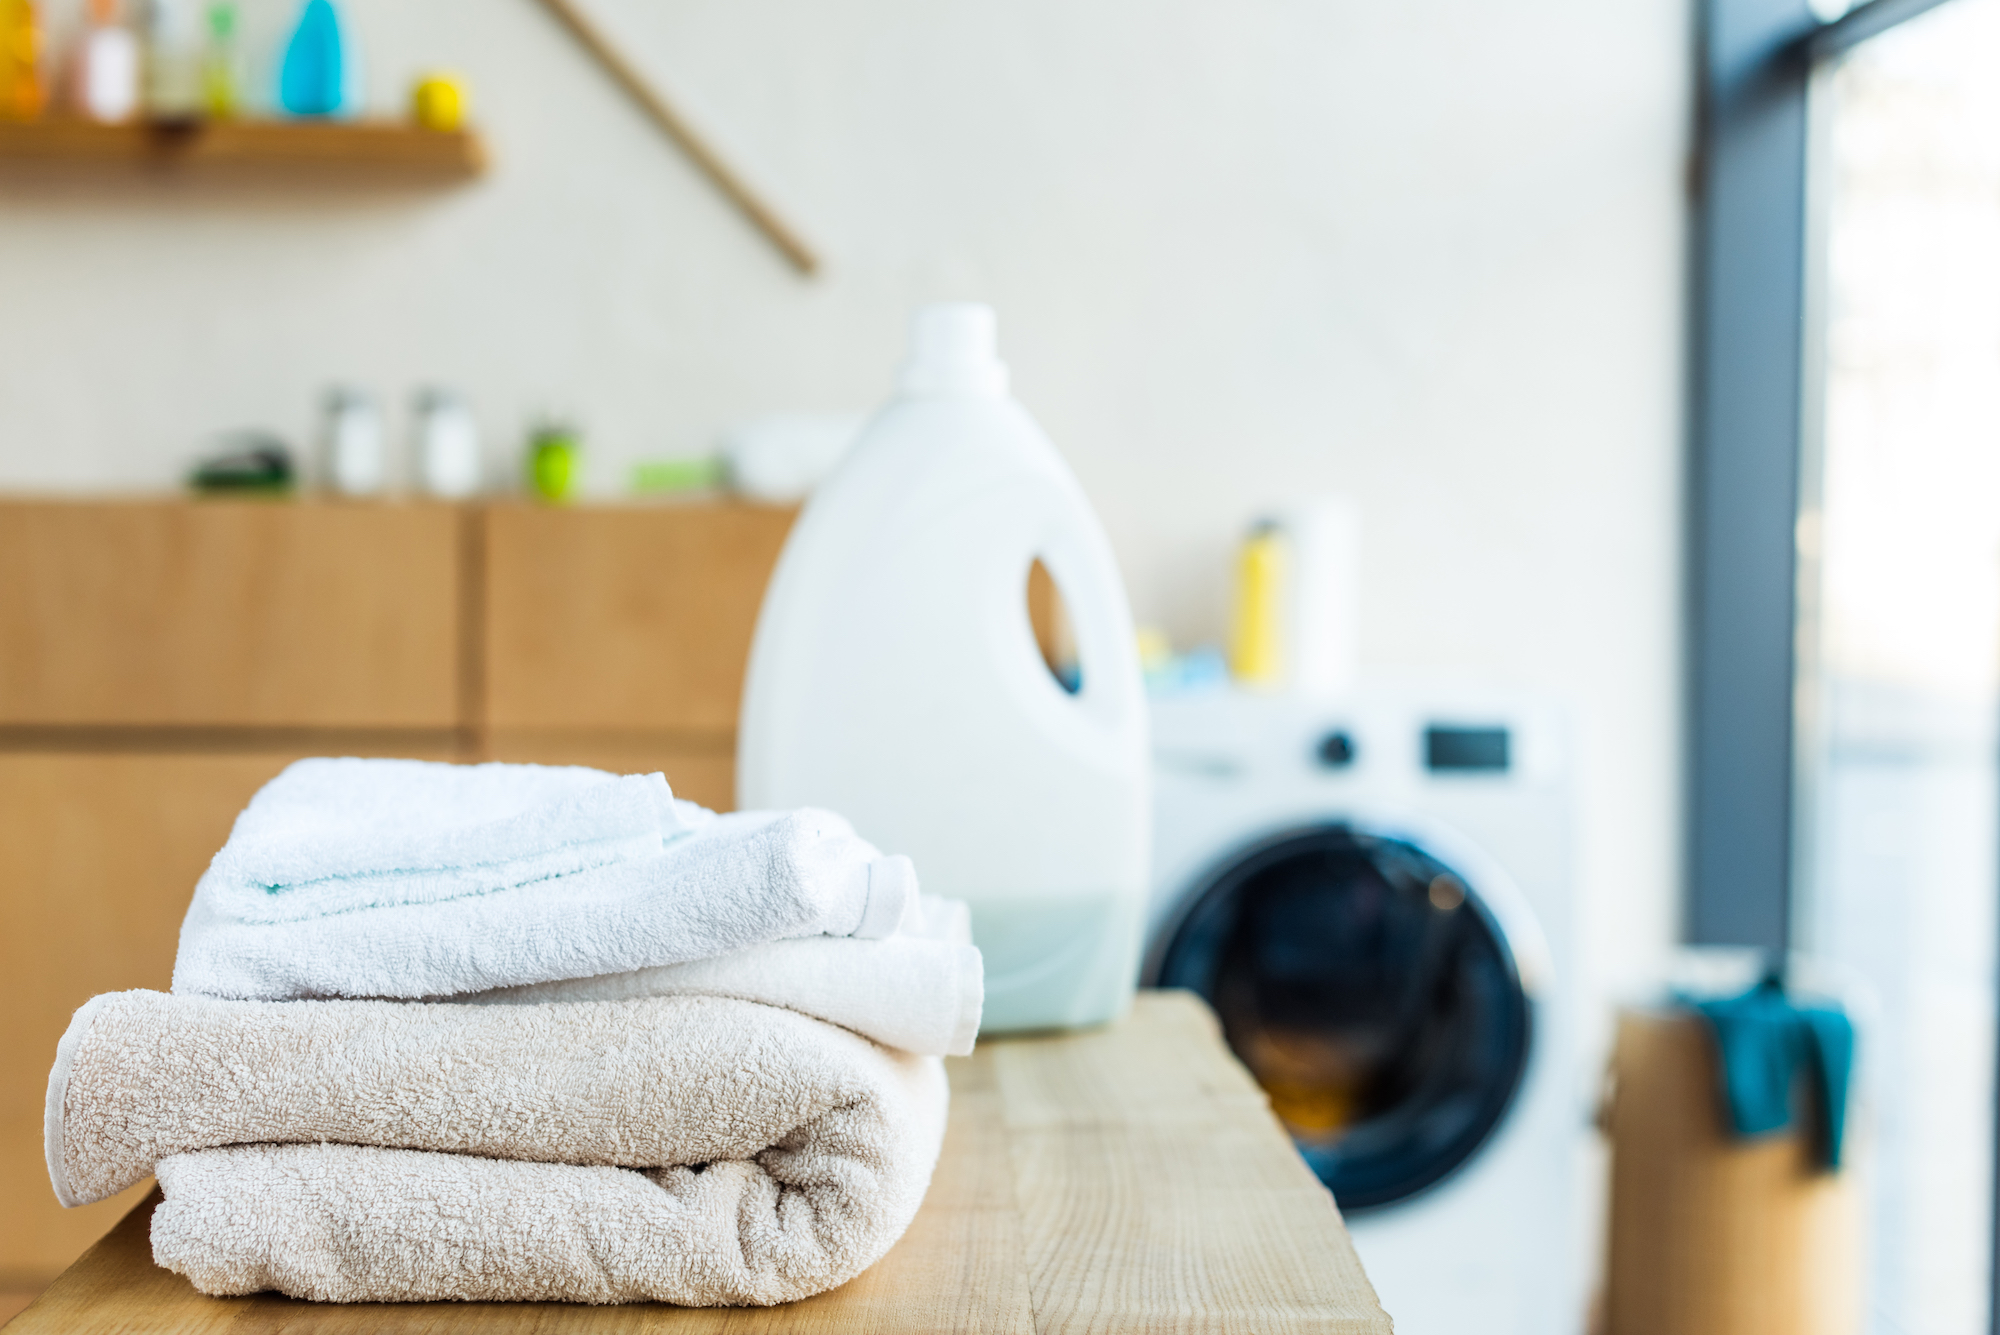 Dangers of harmful household cleaning products. Household chemicals in cleaning products are detrimental to human health & a list of safe cleaning products. 